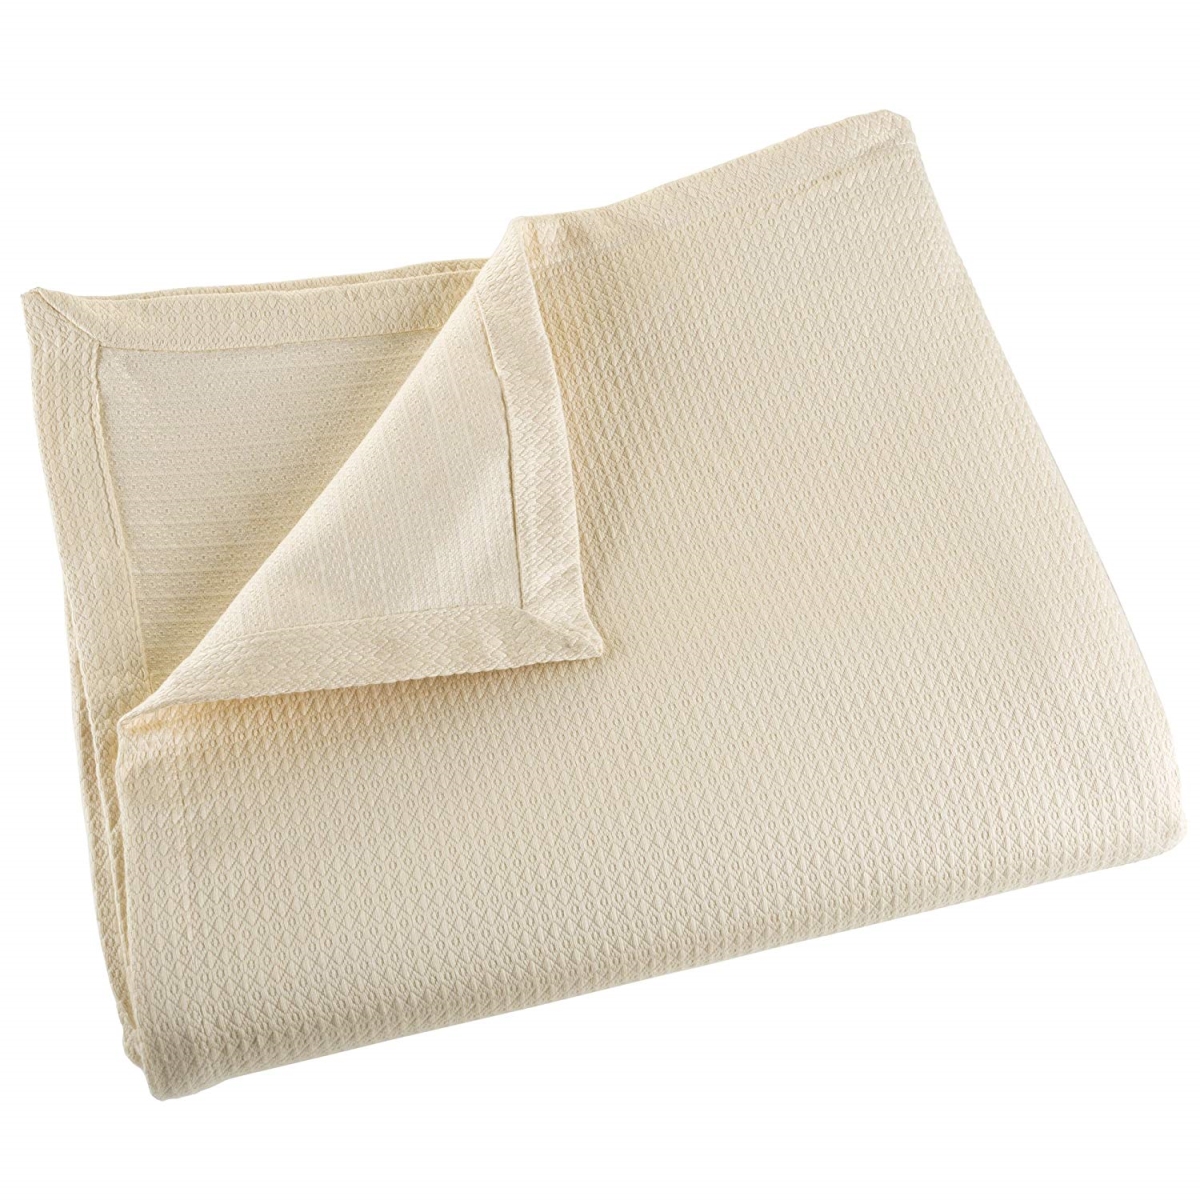 61a-43357 Soft Breathable 100 Percent Cotton Blanket, Cream - Twin & King Size